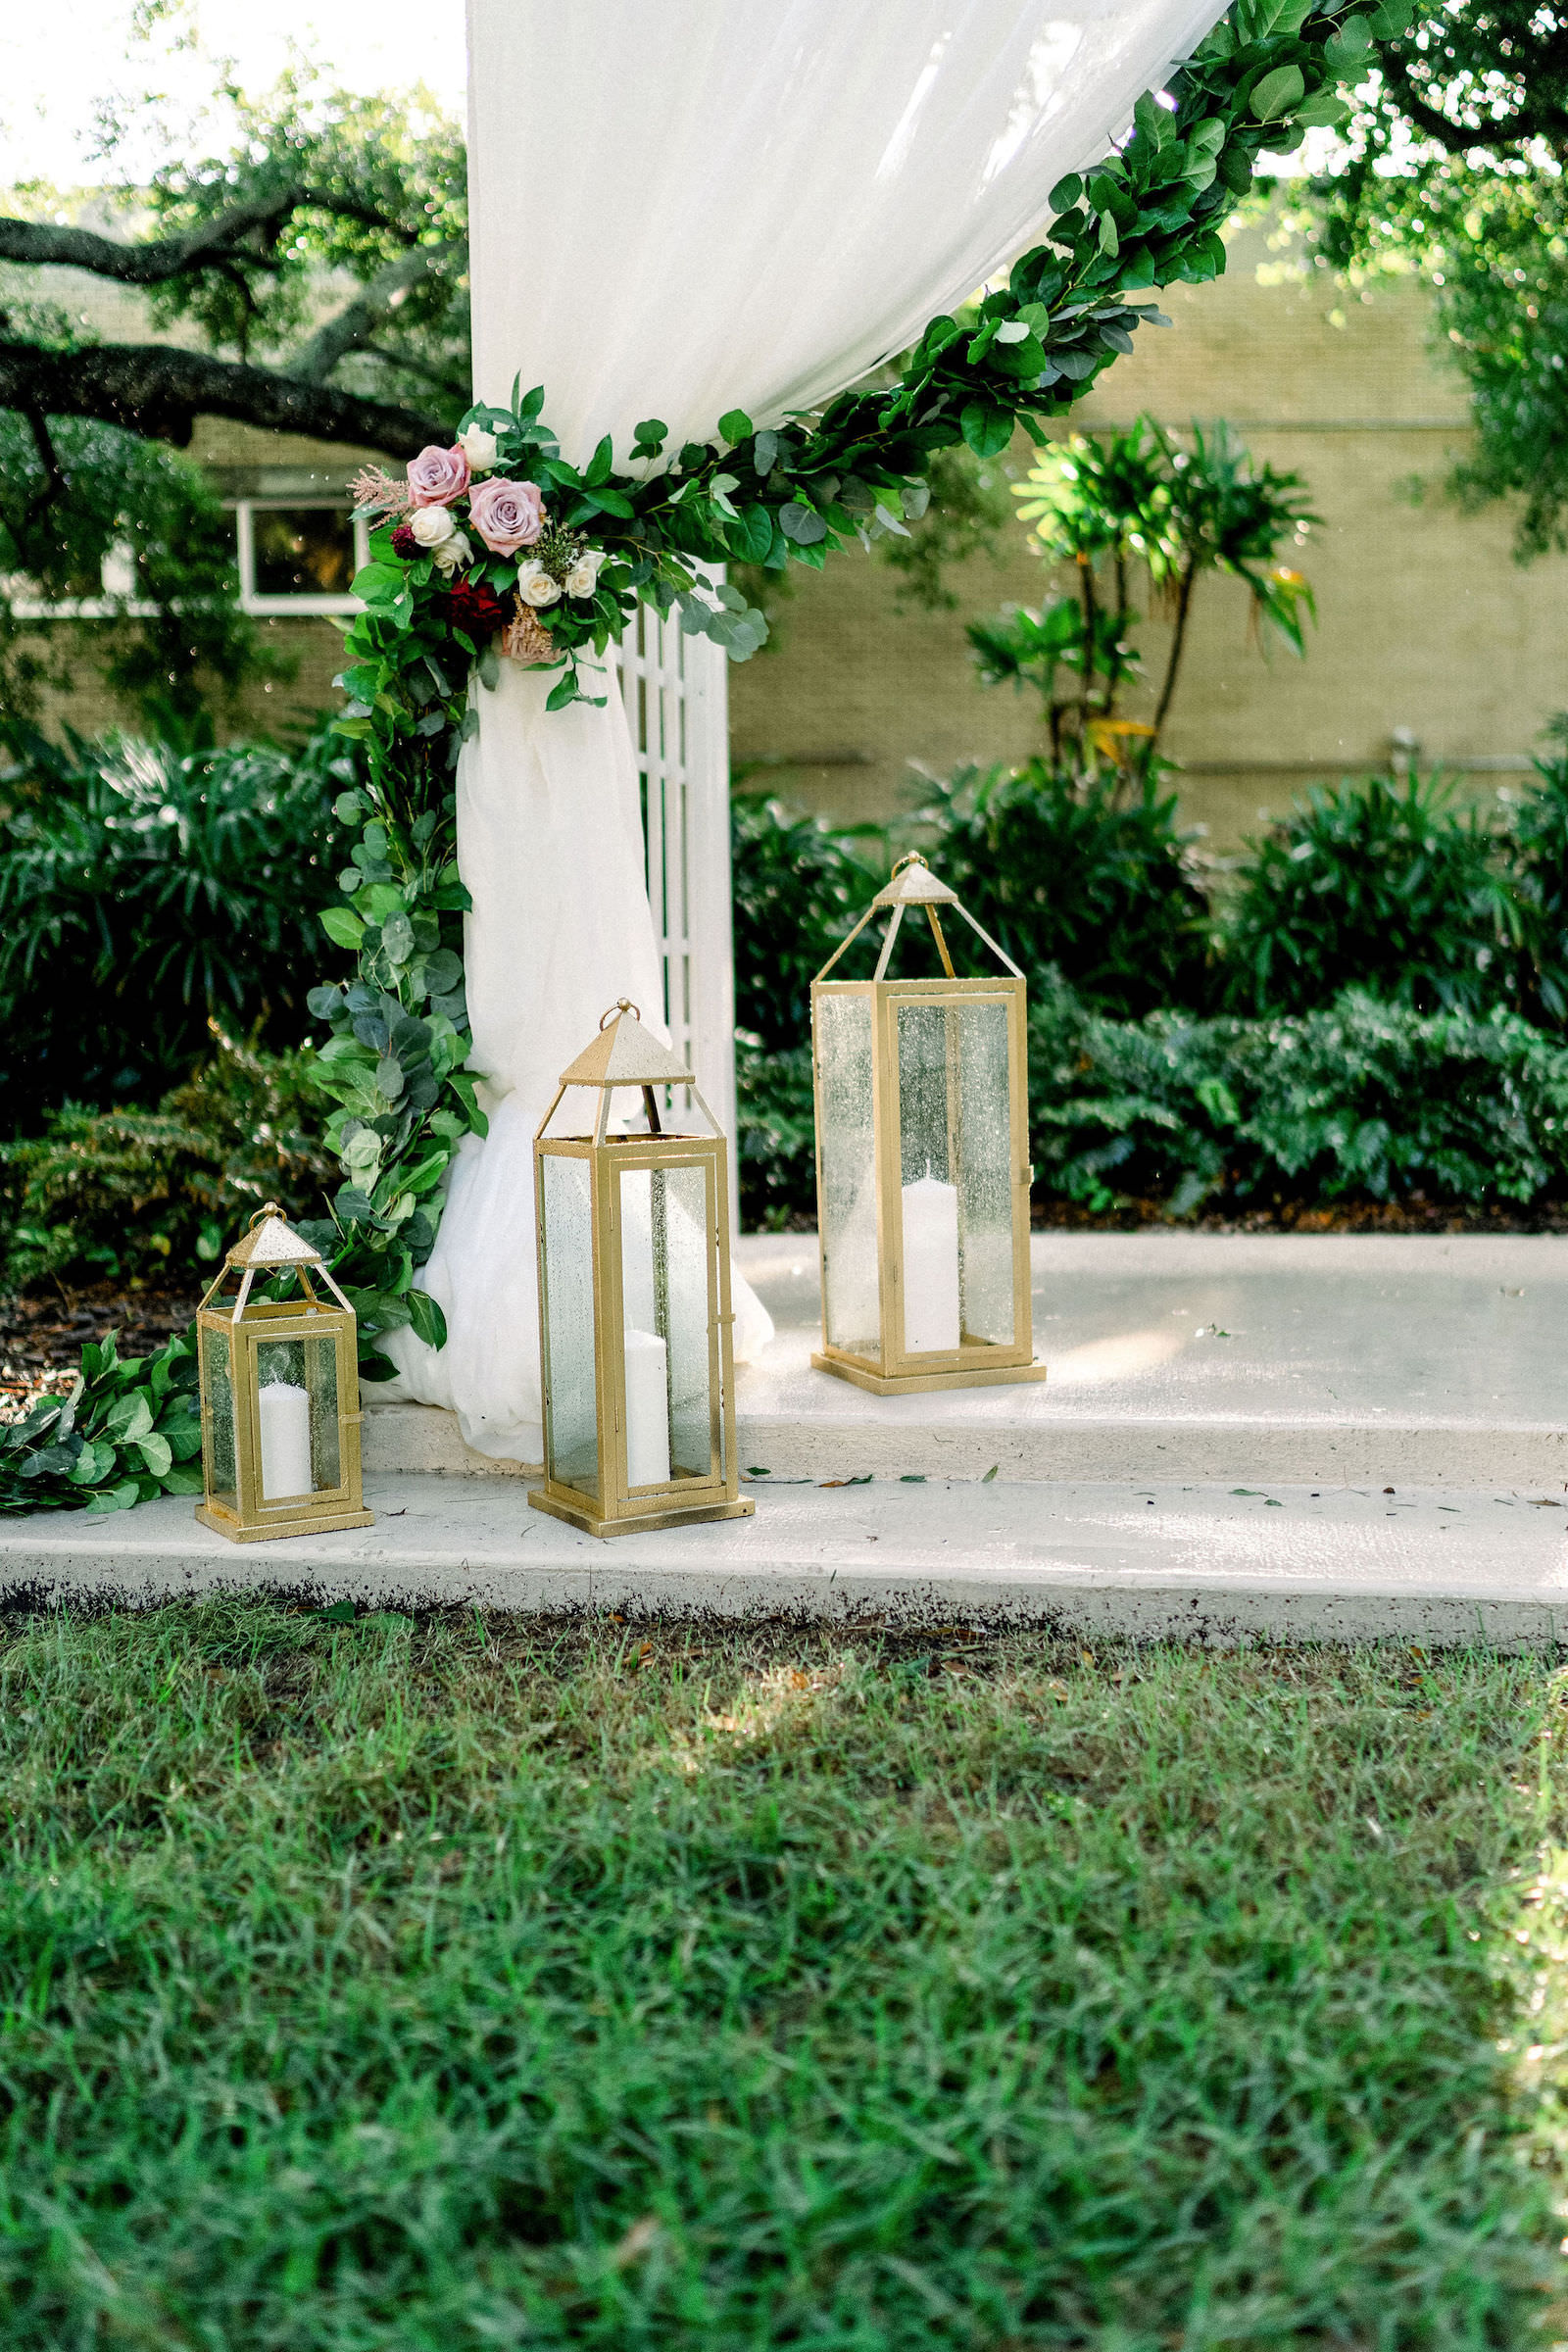 Garden Wedding Ceremony with Draped Arbor and Greenery Backdrop and Gold Lanterns